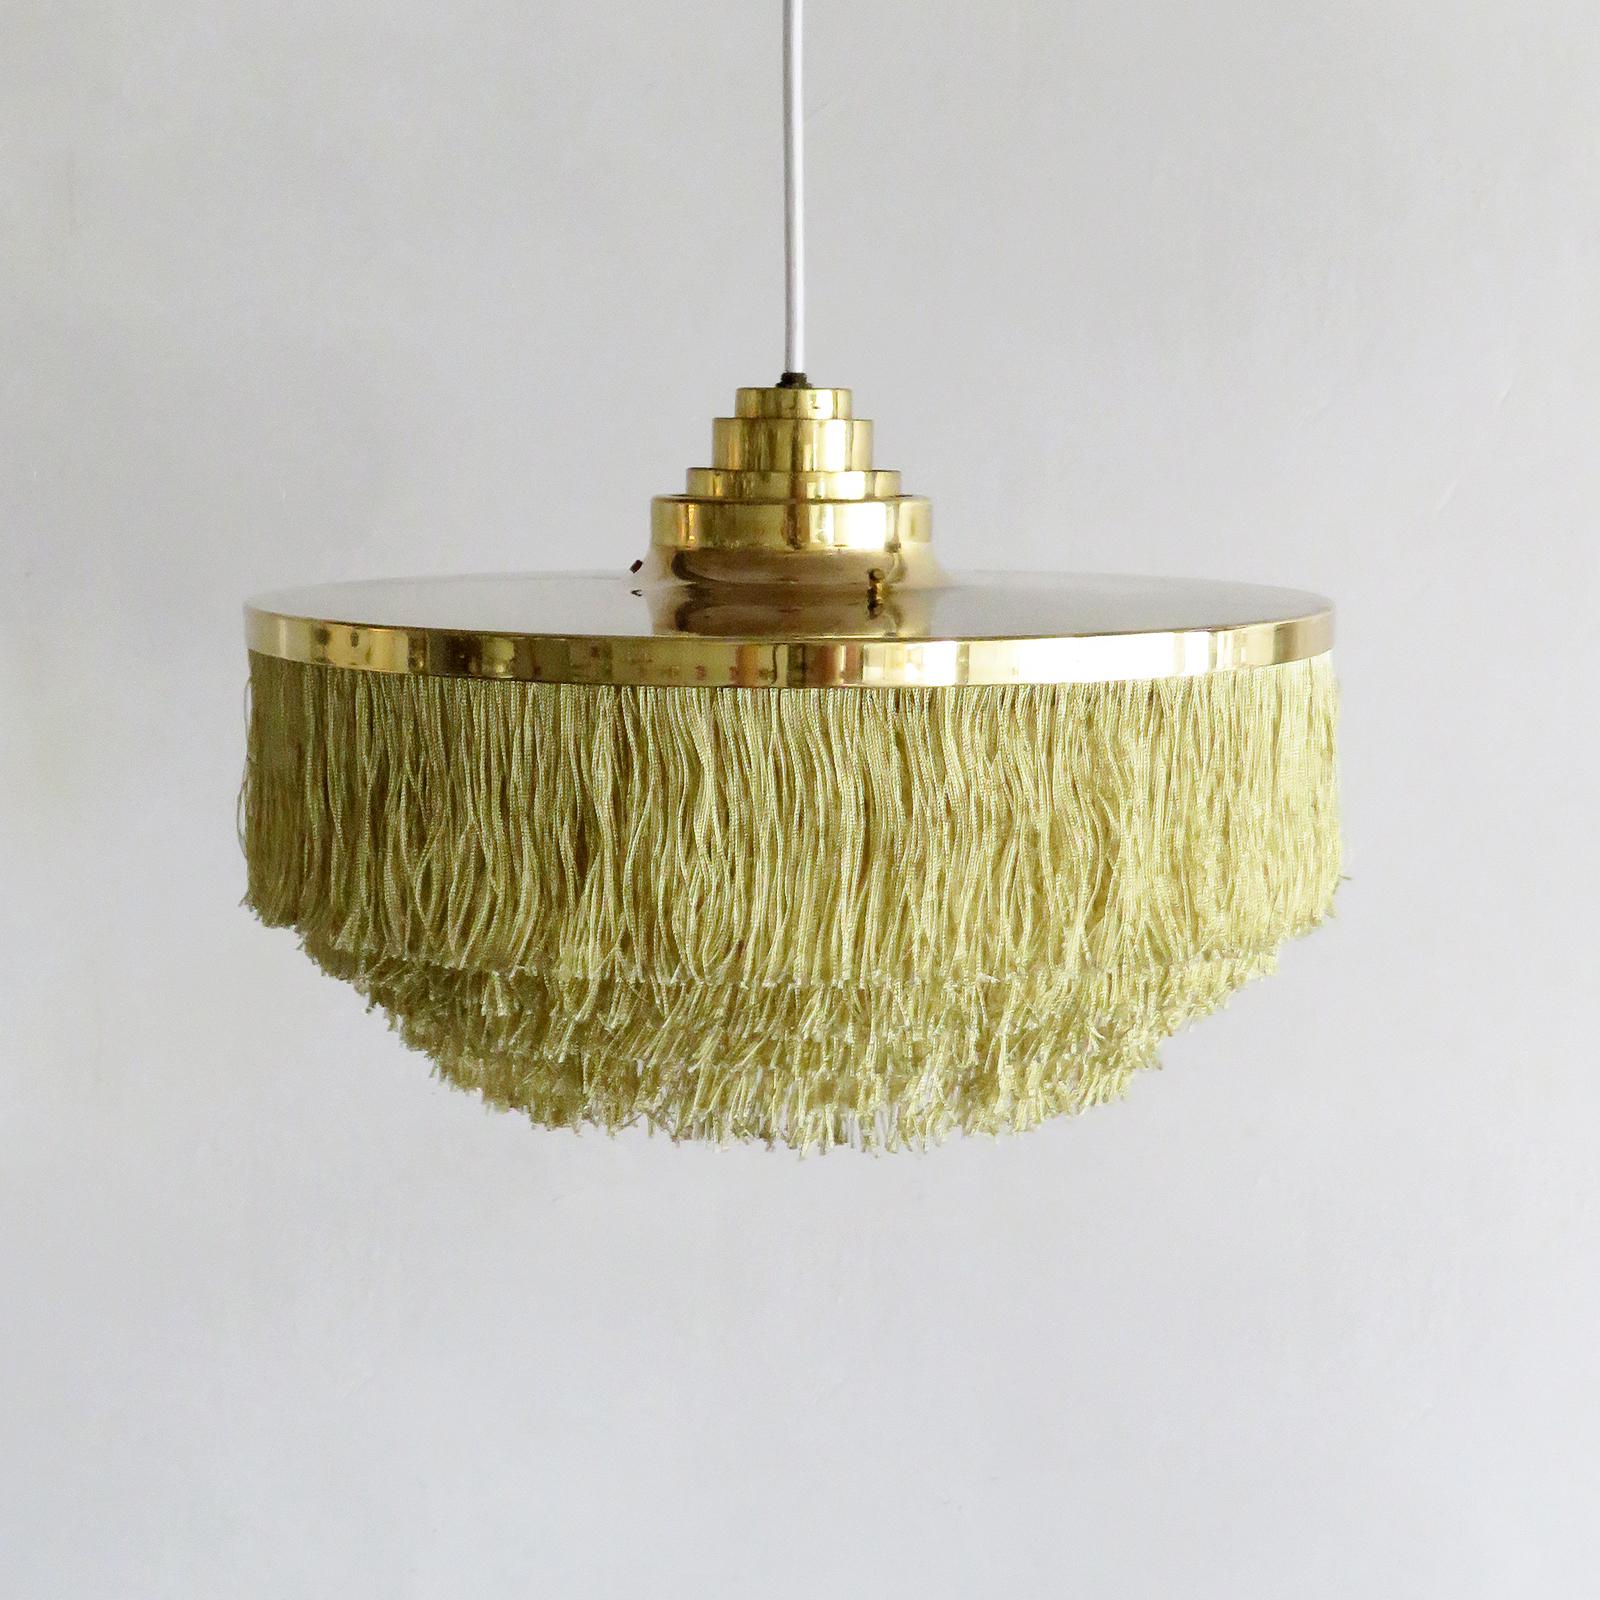 Hans-Agne Jakobsson Pendant Lamp Model T-603, 1960 In Good Condition For Sale In Los Angeles, CA